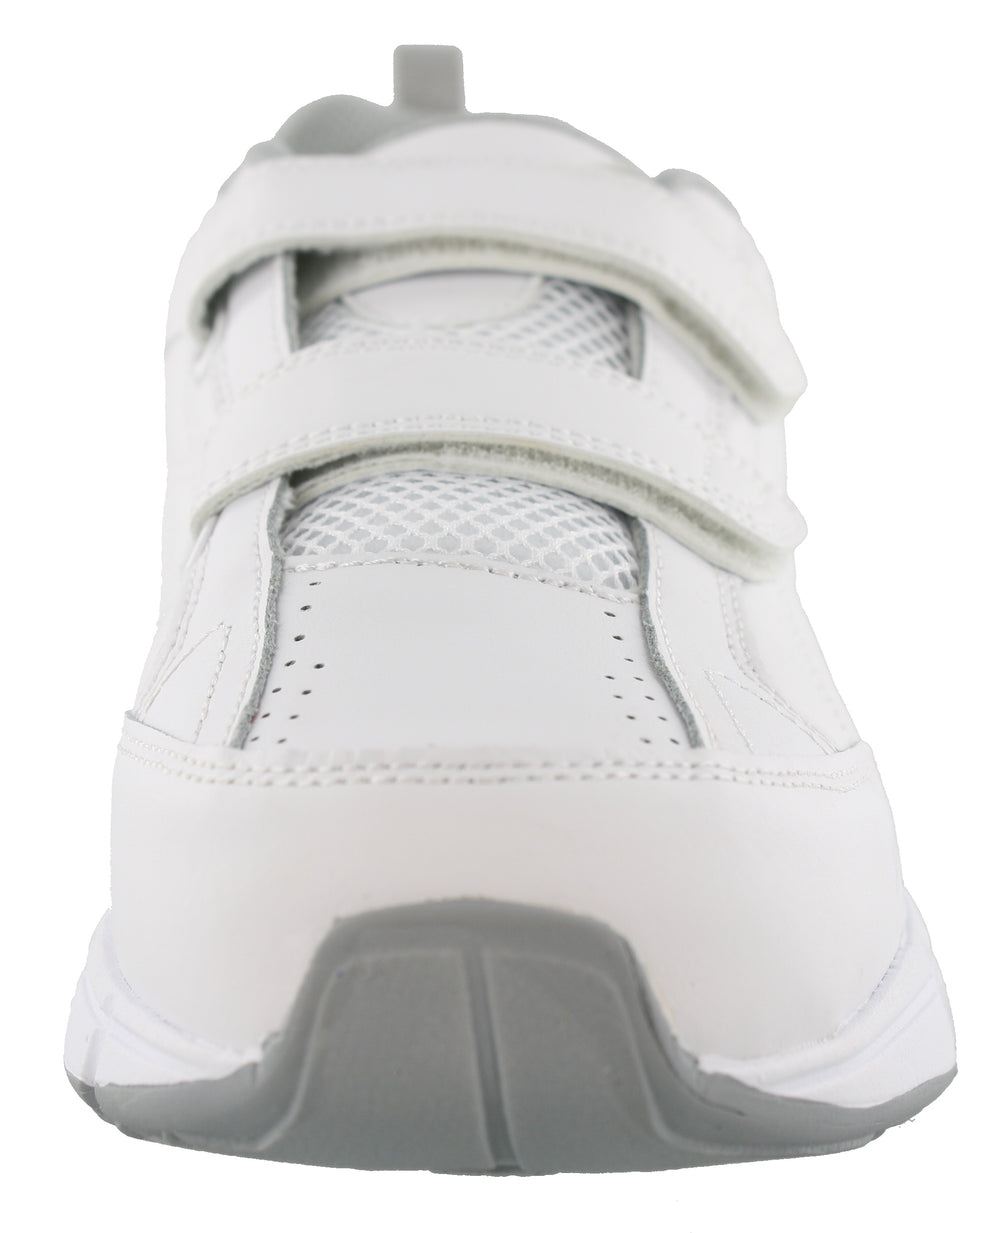 Senior Walking Shoes - Men's Extra Wide Comfort Shoes - Silverts